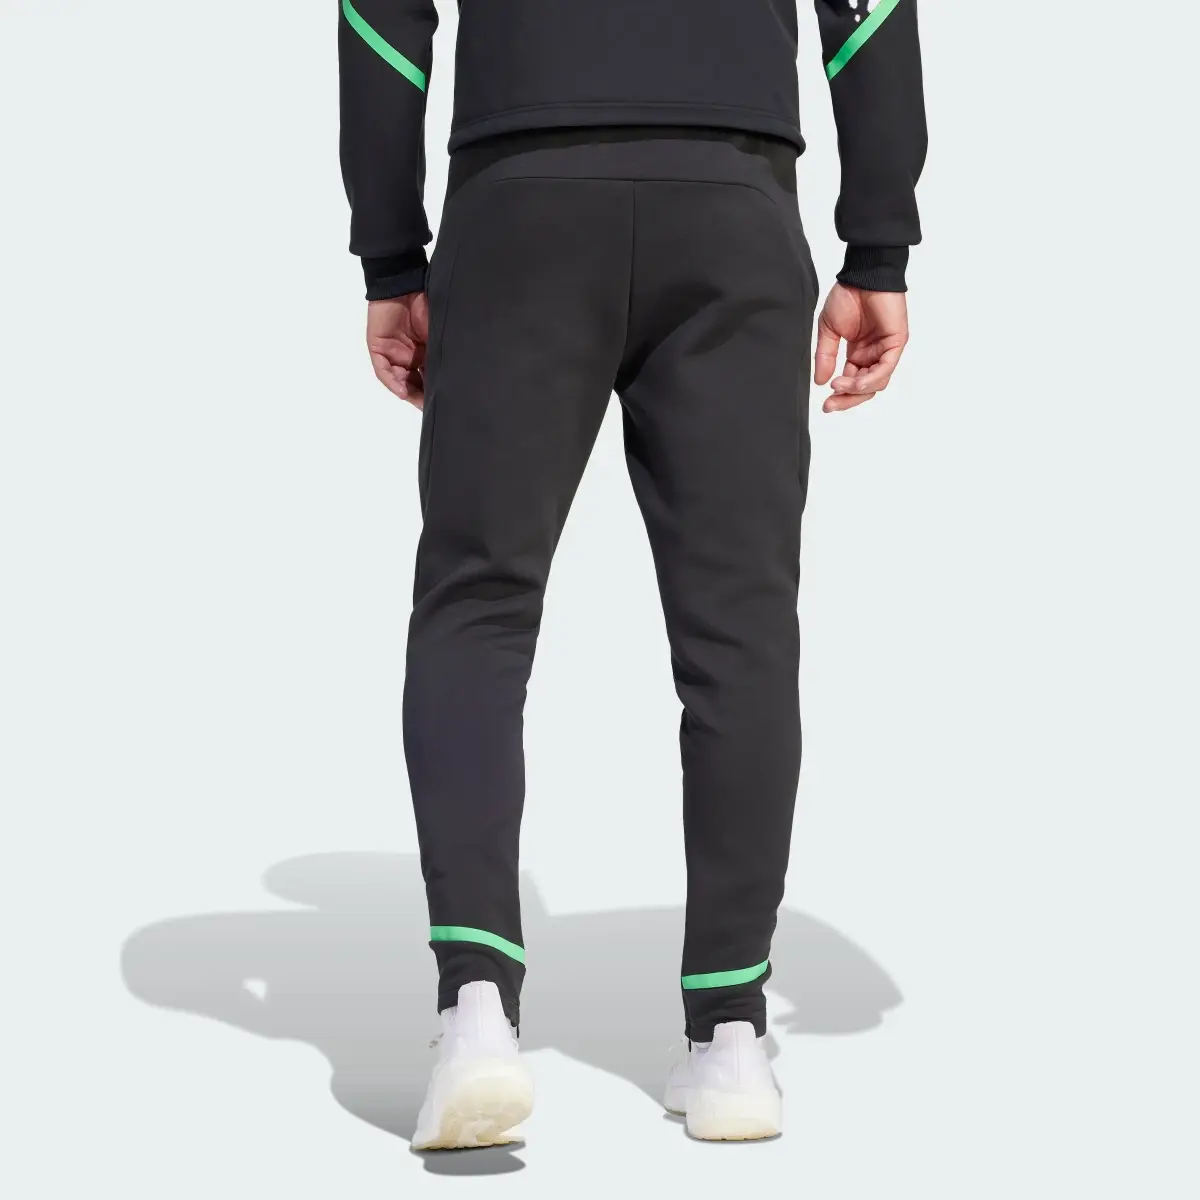 Adidas FC Bayern Designed for Gameday Tracksuit Bottoms. 2